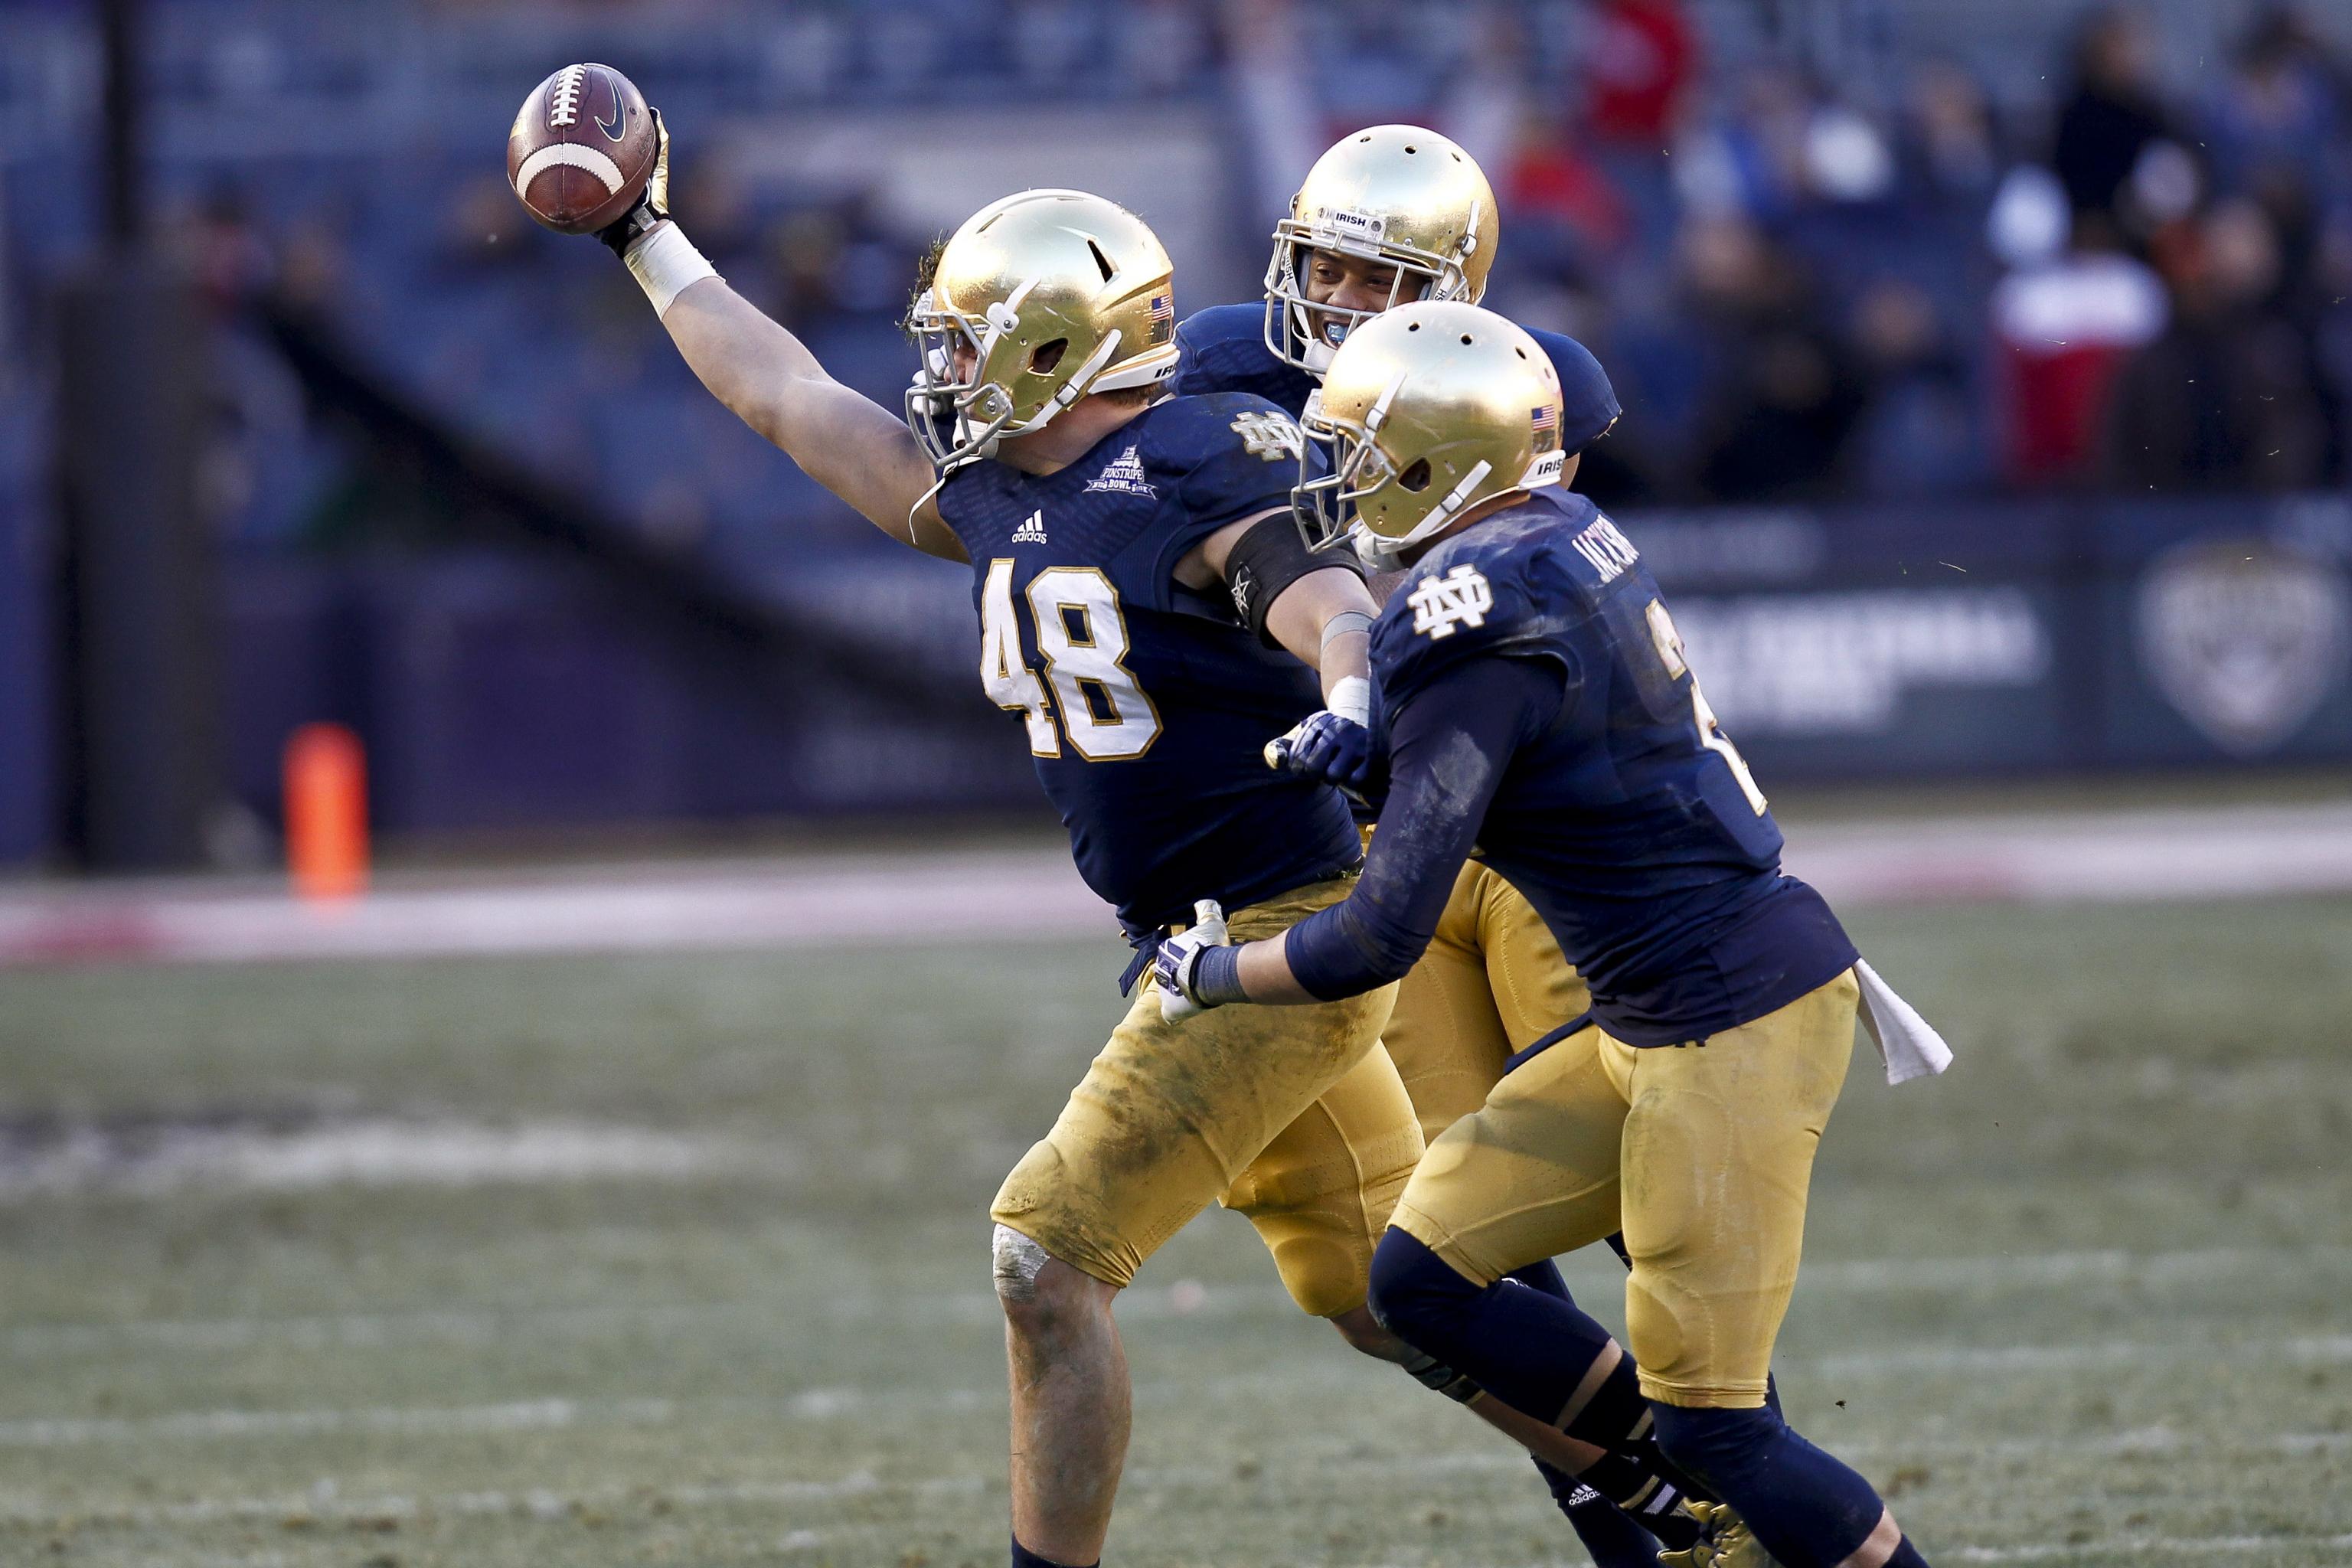 Notre Dame, Under Armour receive mixed reviews over new uniforms